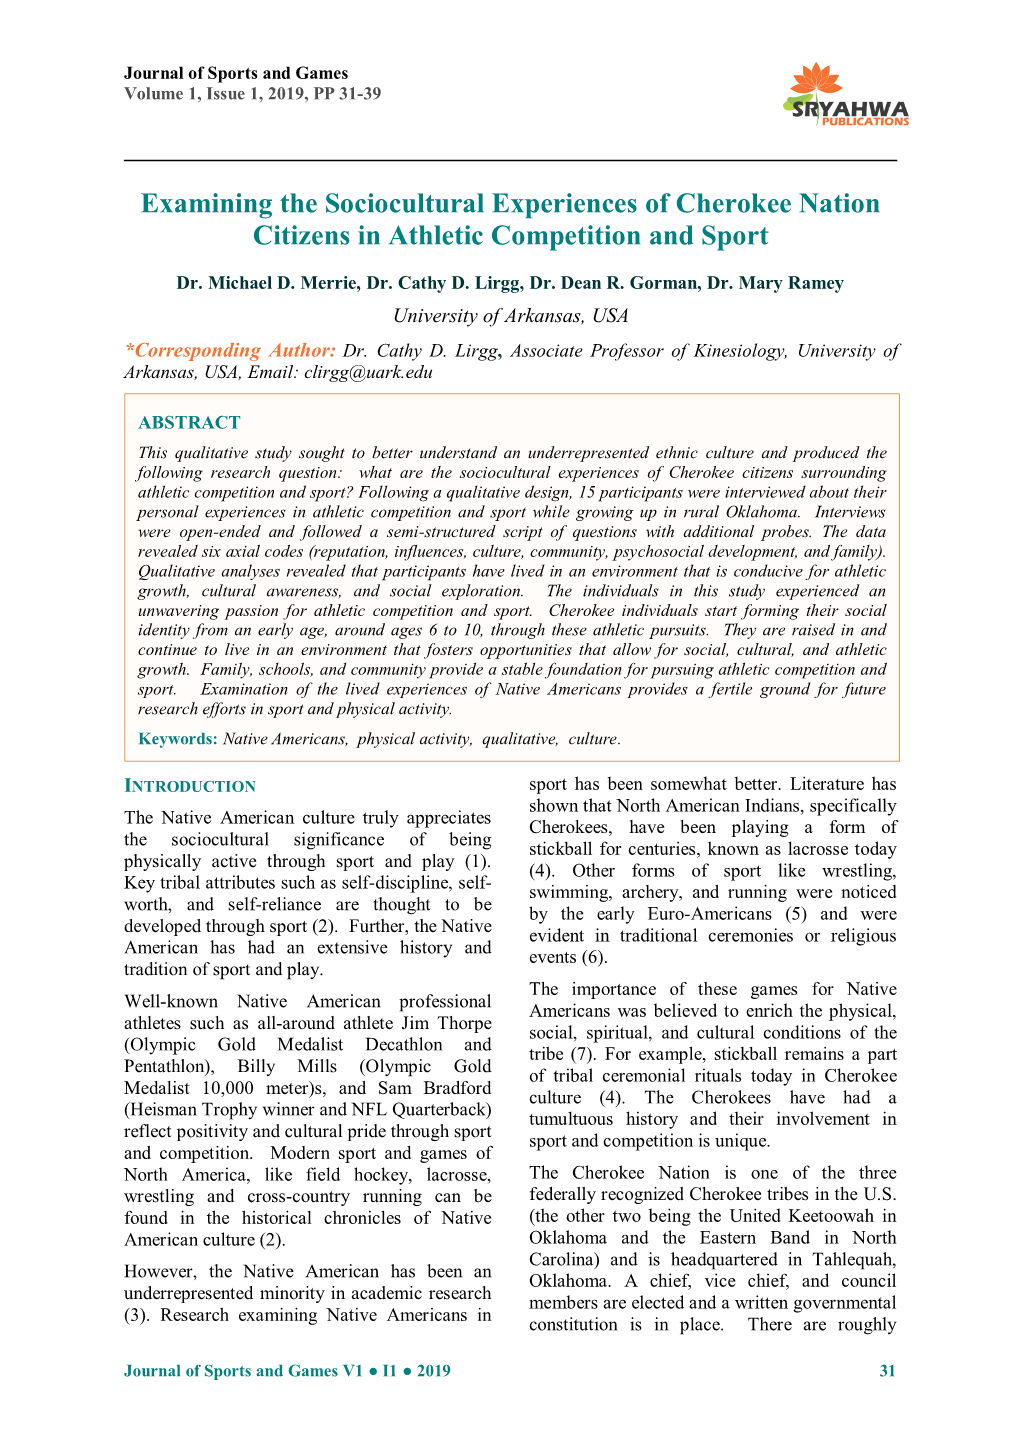 Examining the Sociocultural Experiences of Cherokee Nation Citizens in Athletic Competition and Sport